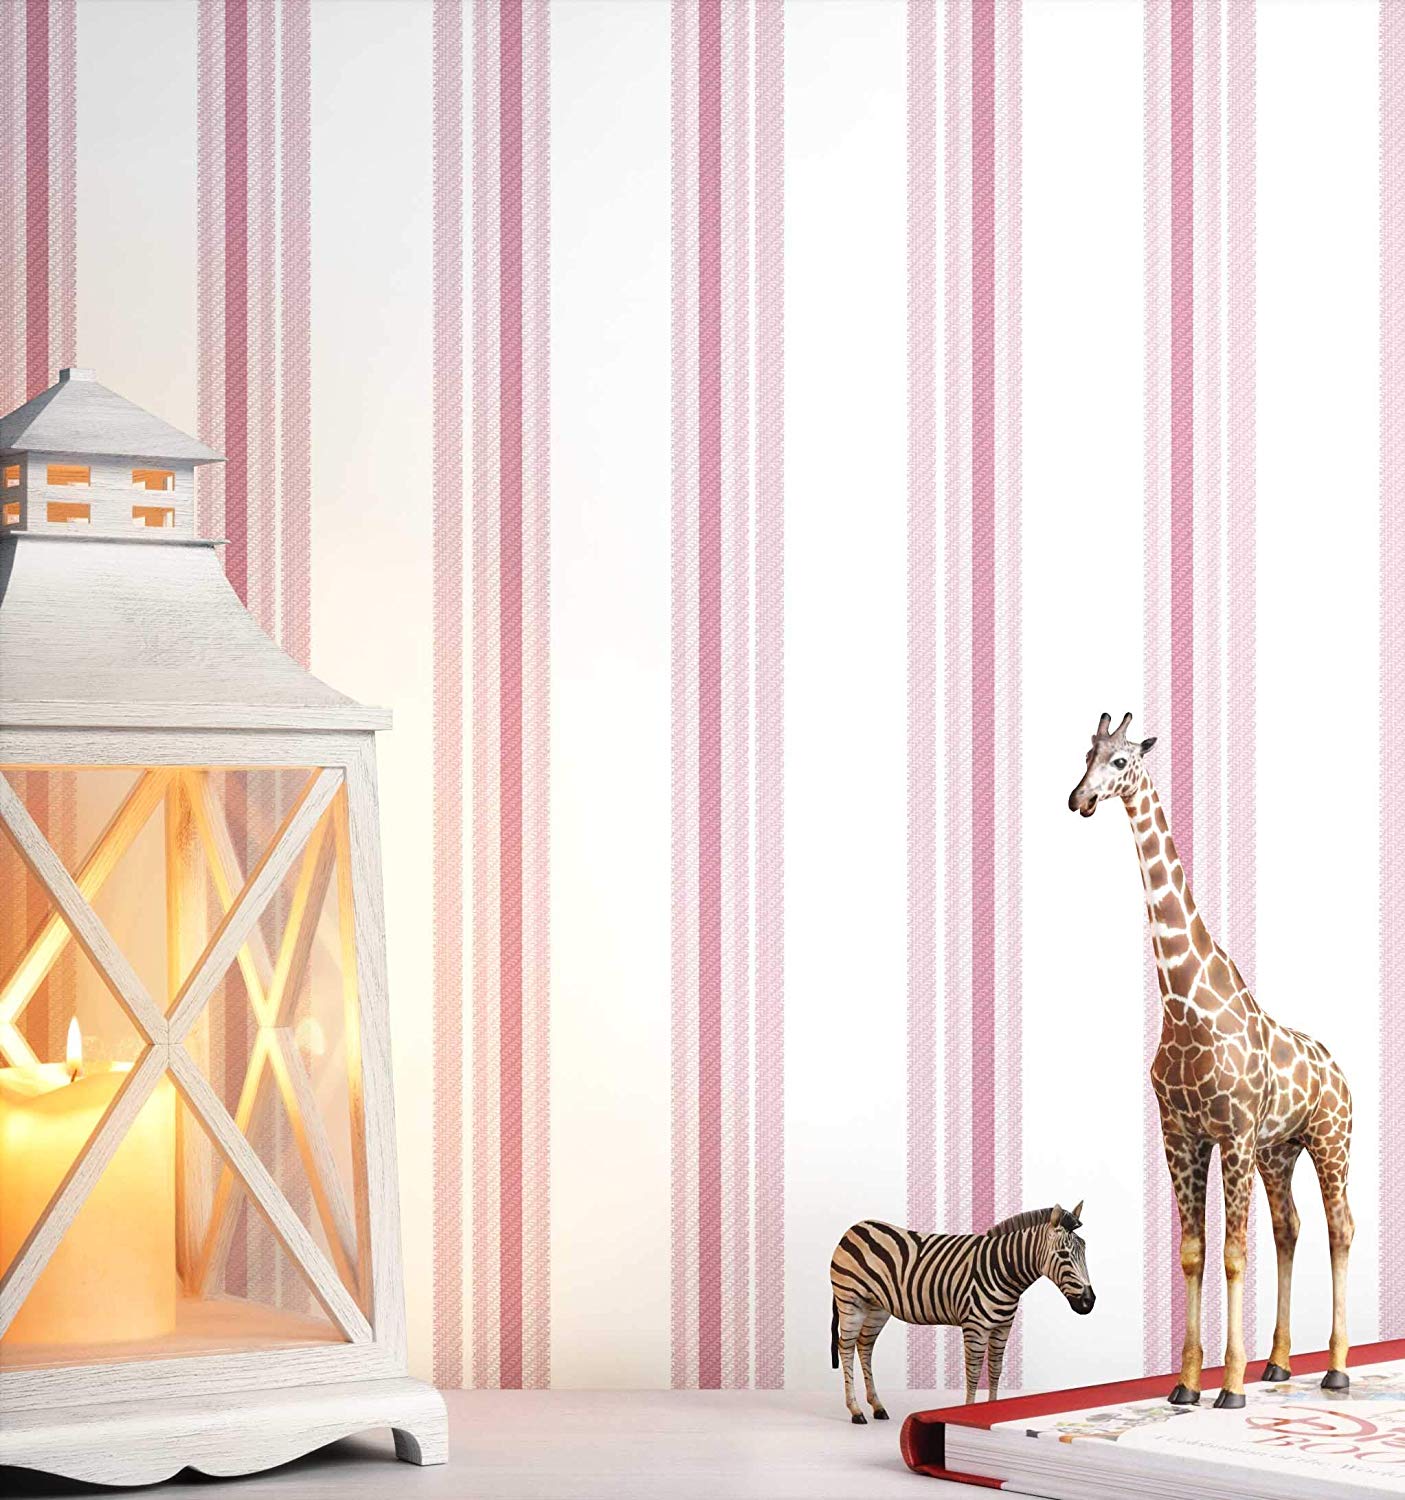 Newroom Childrens Wallpaper Pink Striped Stripes Childrens Non-Woven Wall